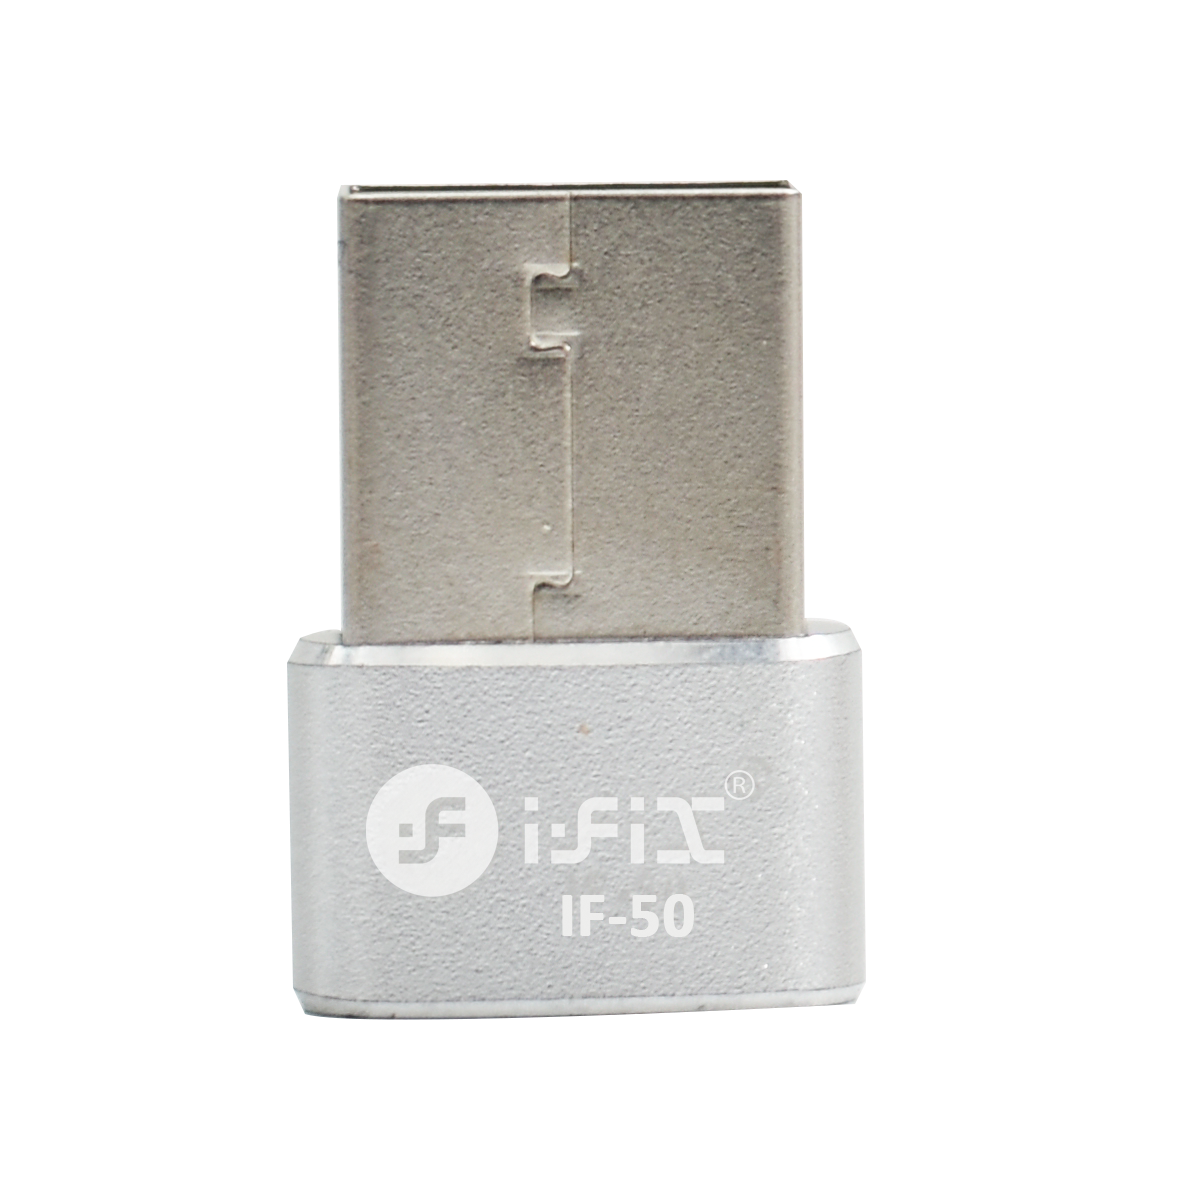 iFiX IF-50 Super fast Plug & Play  PD Connector (Silver)